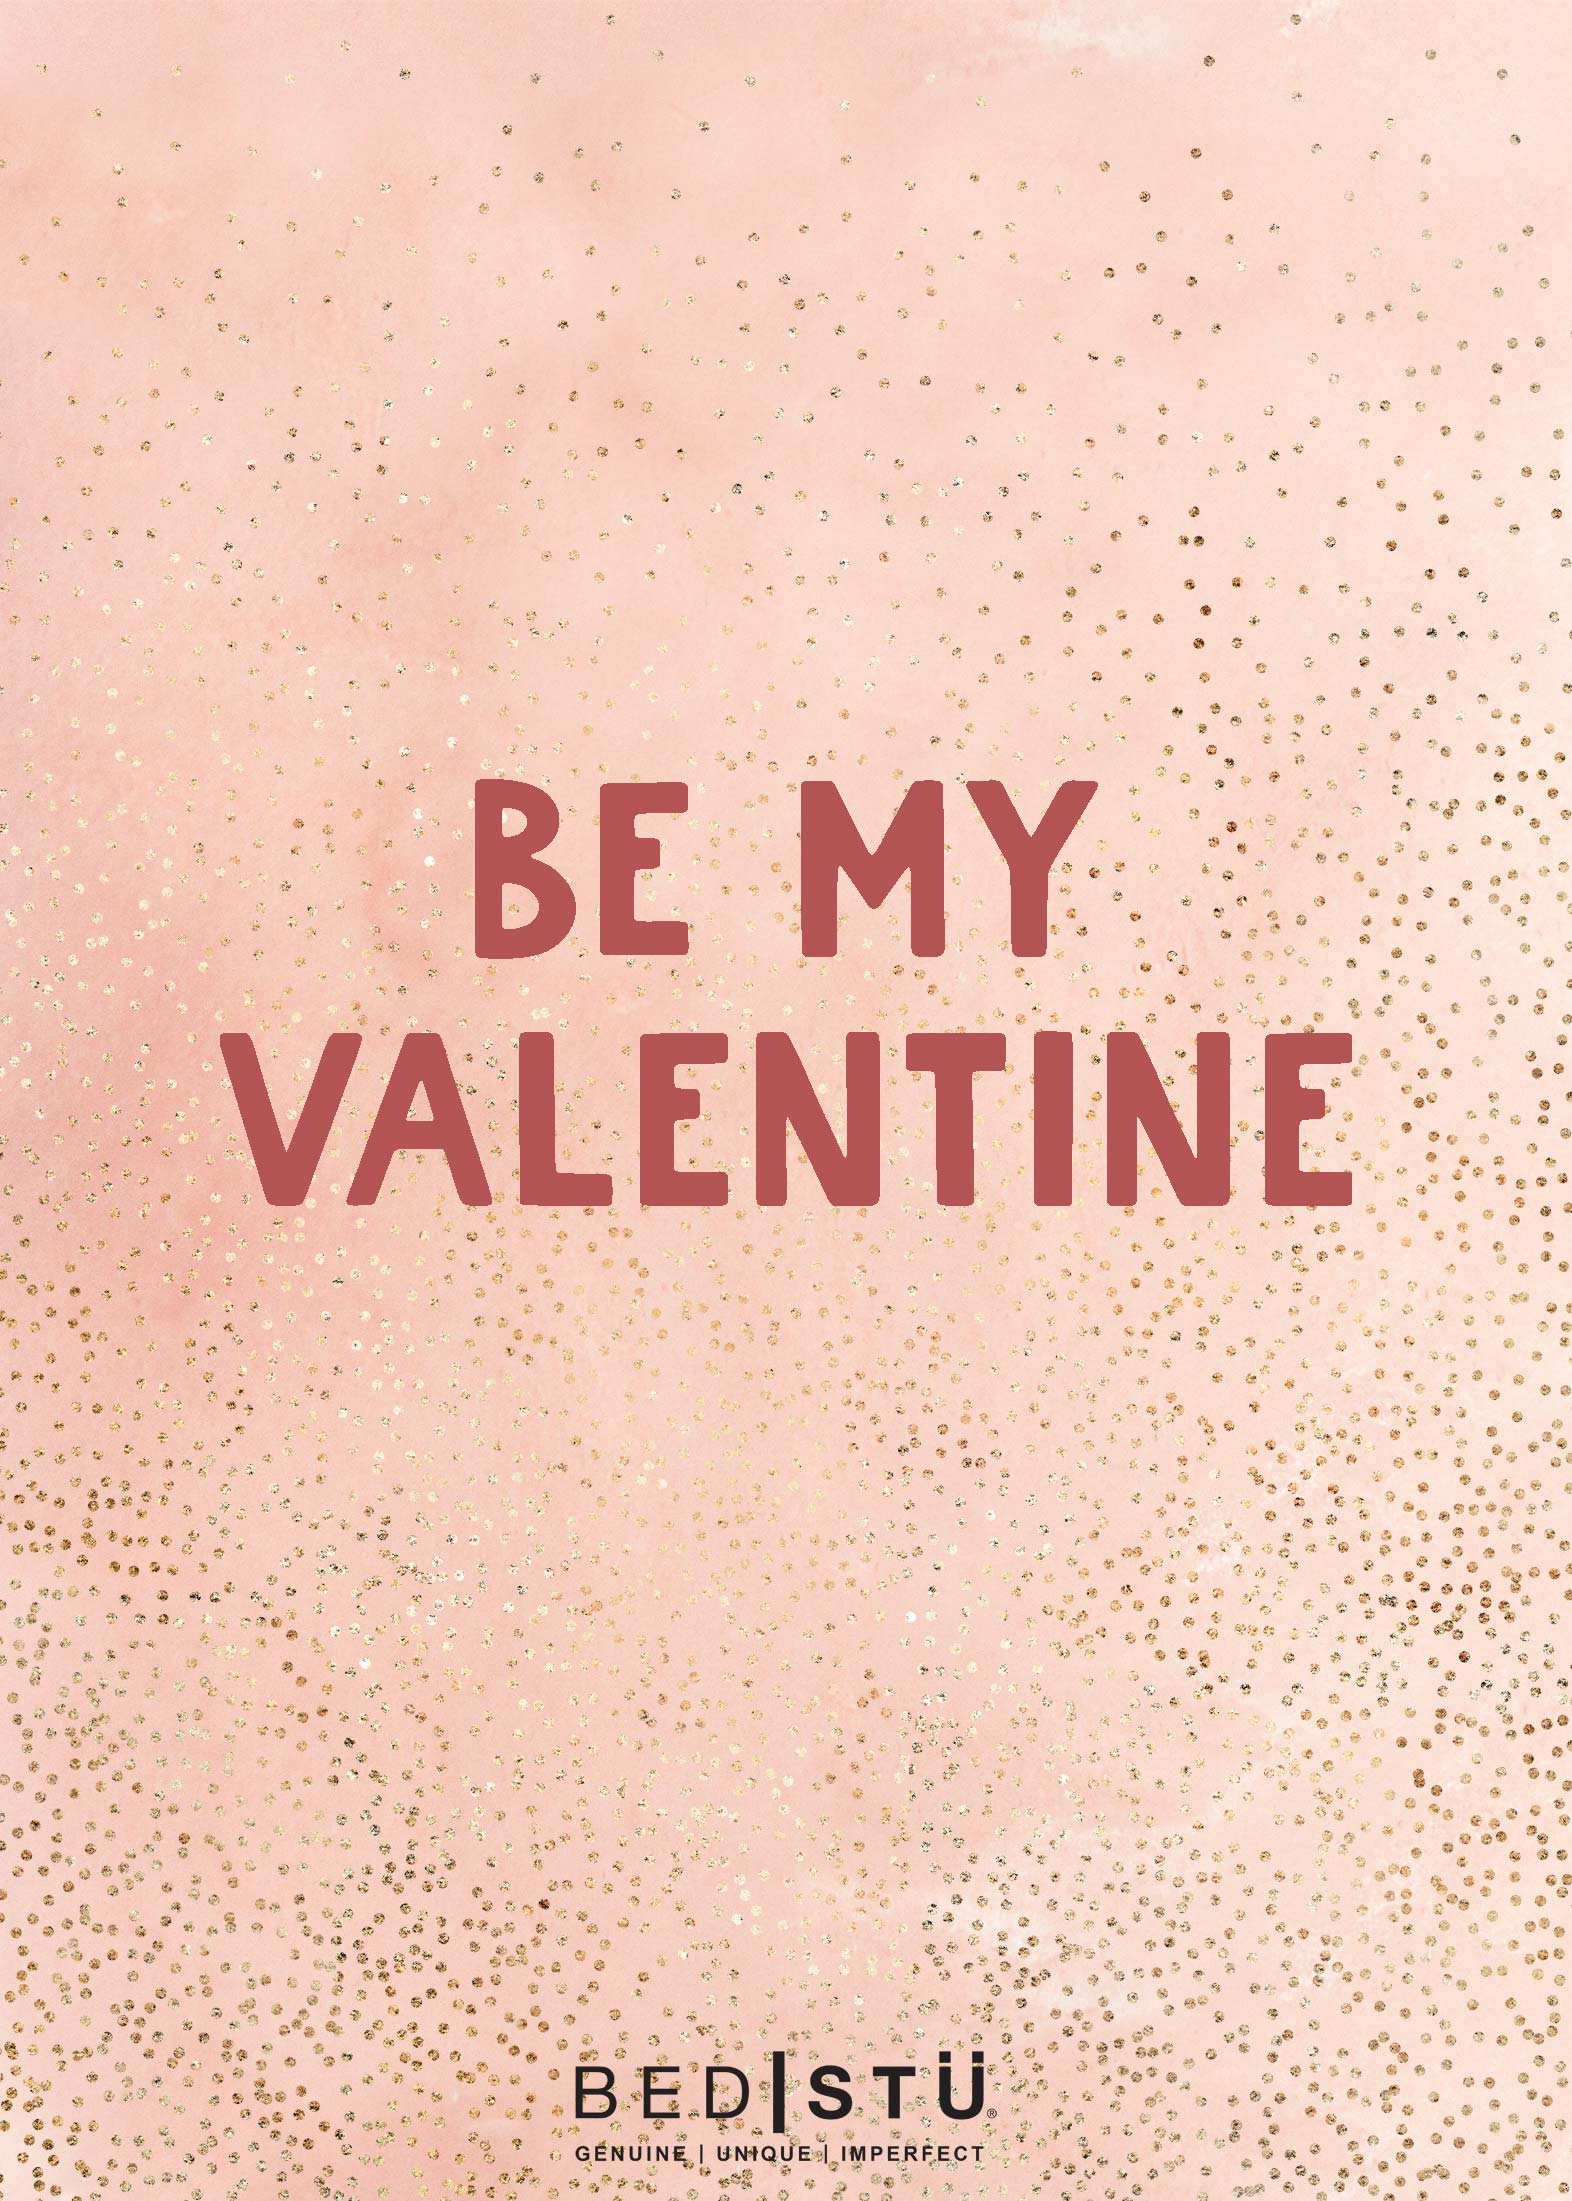 A pink background with the words "Be My Valentine" by Bed|Stü.